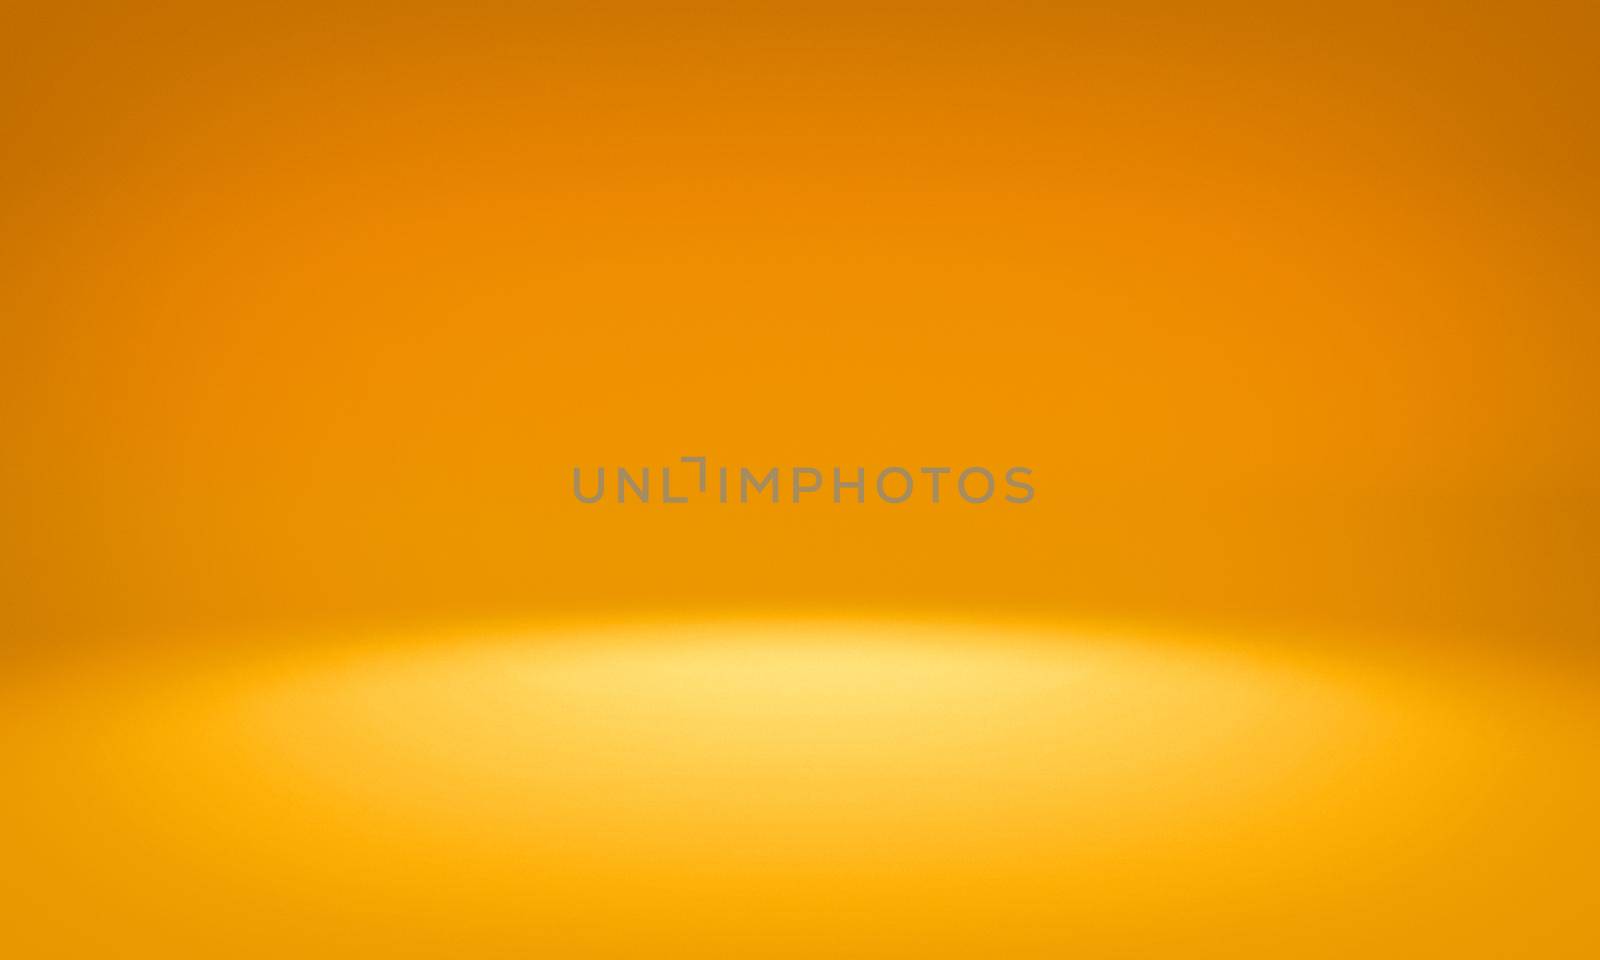 Set light photography studio, clear yellow background.